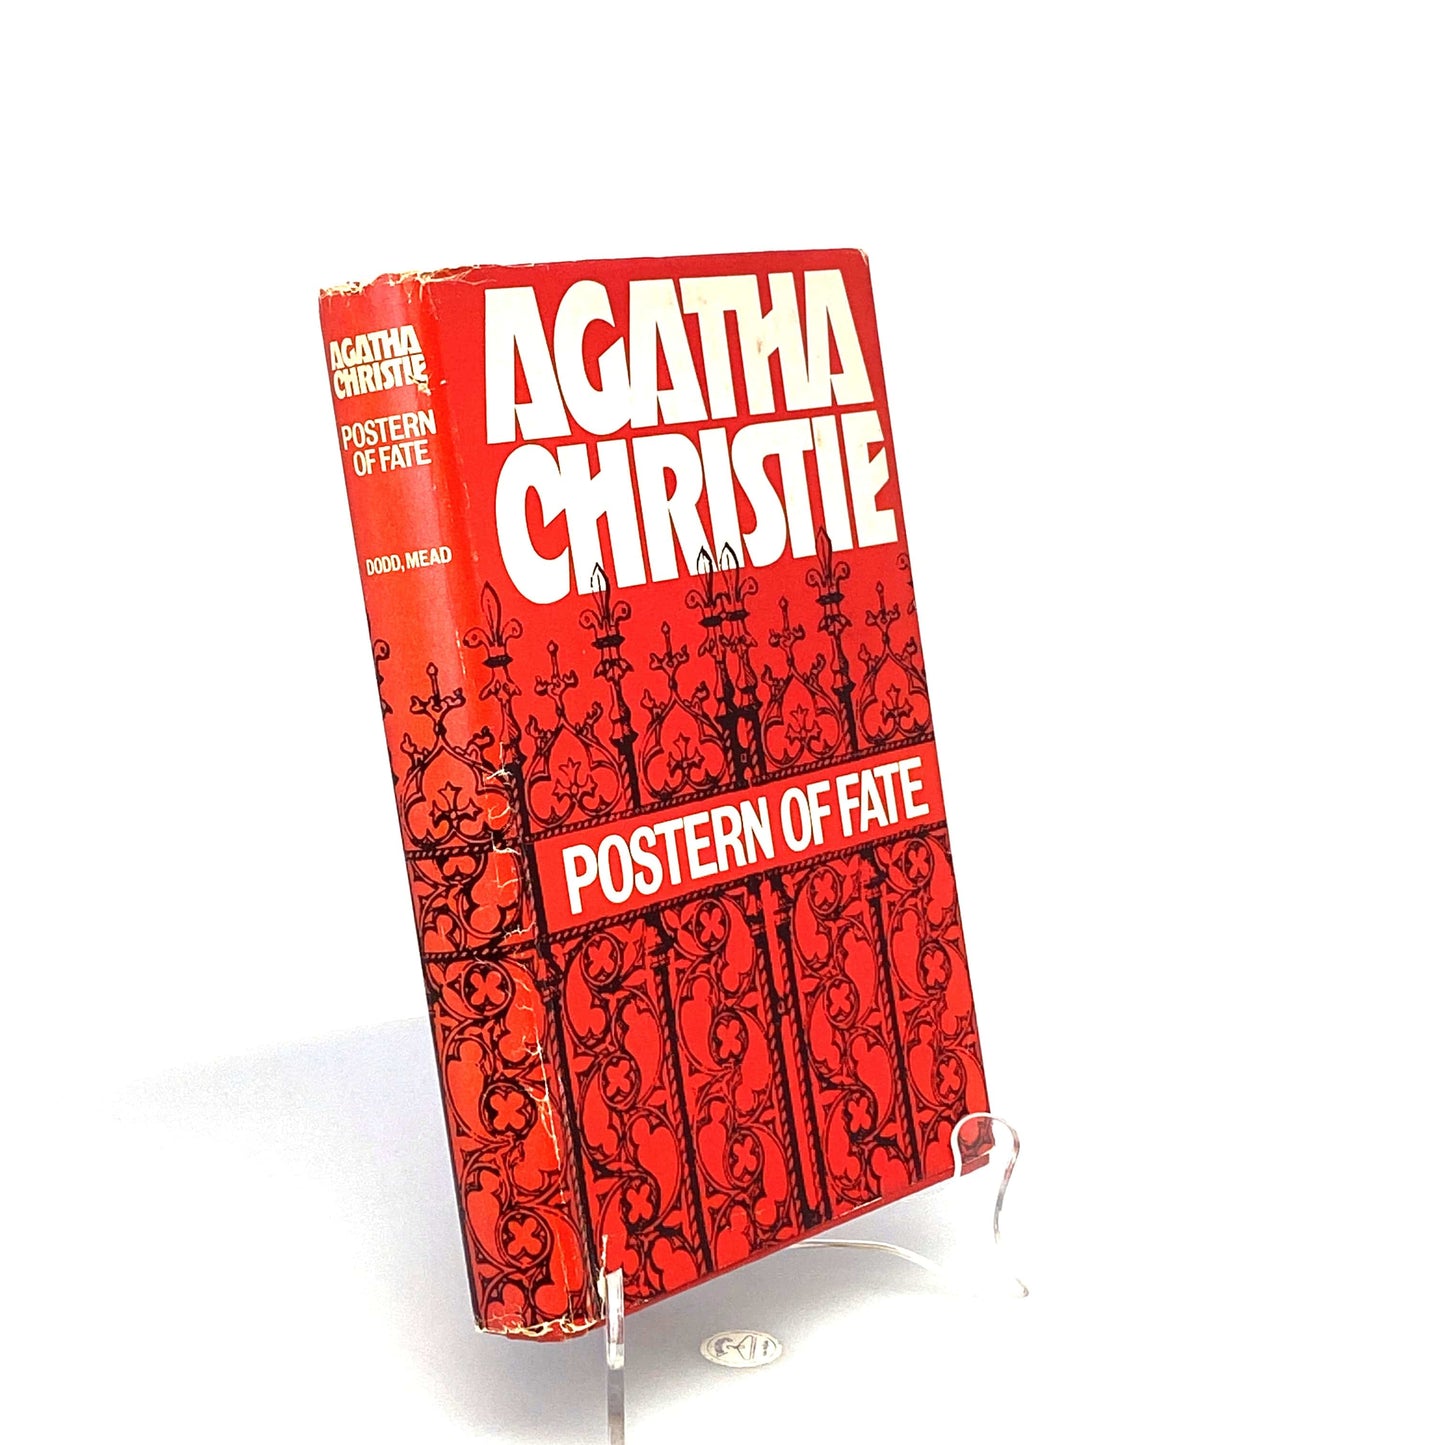 Postern of Fate Agatha Christie 1973 Book Club Edition — Vintage Fiction Hardcover